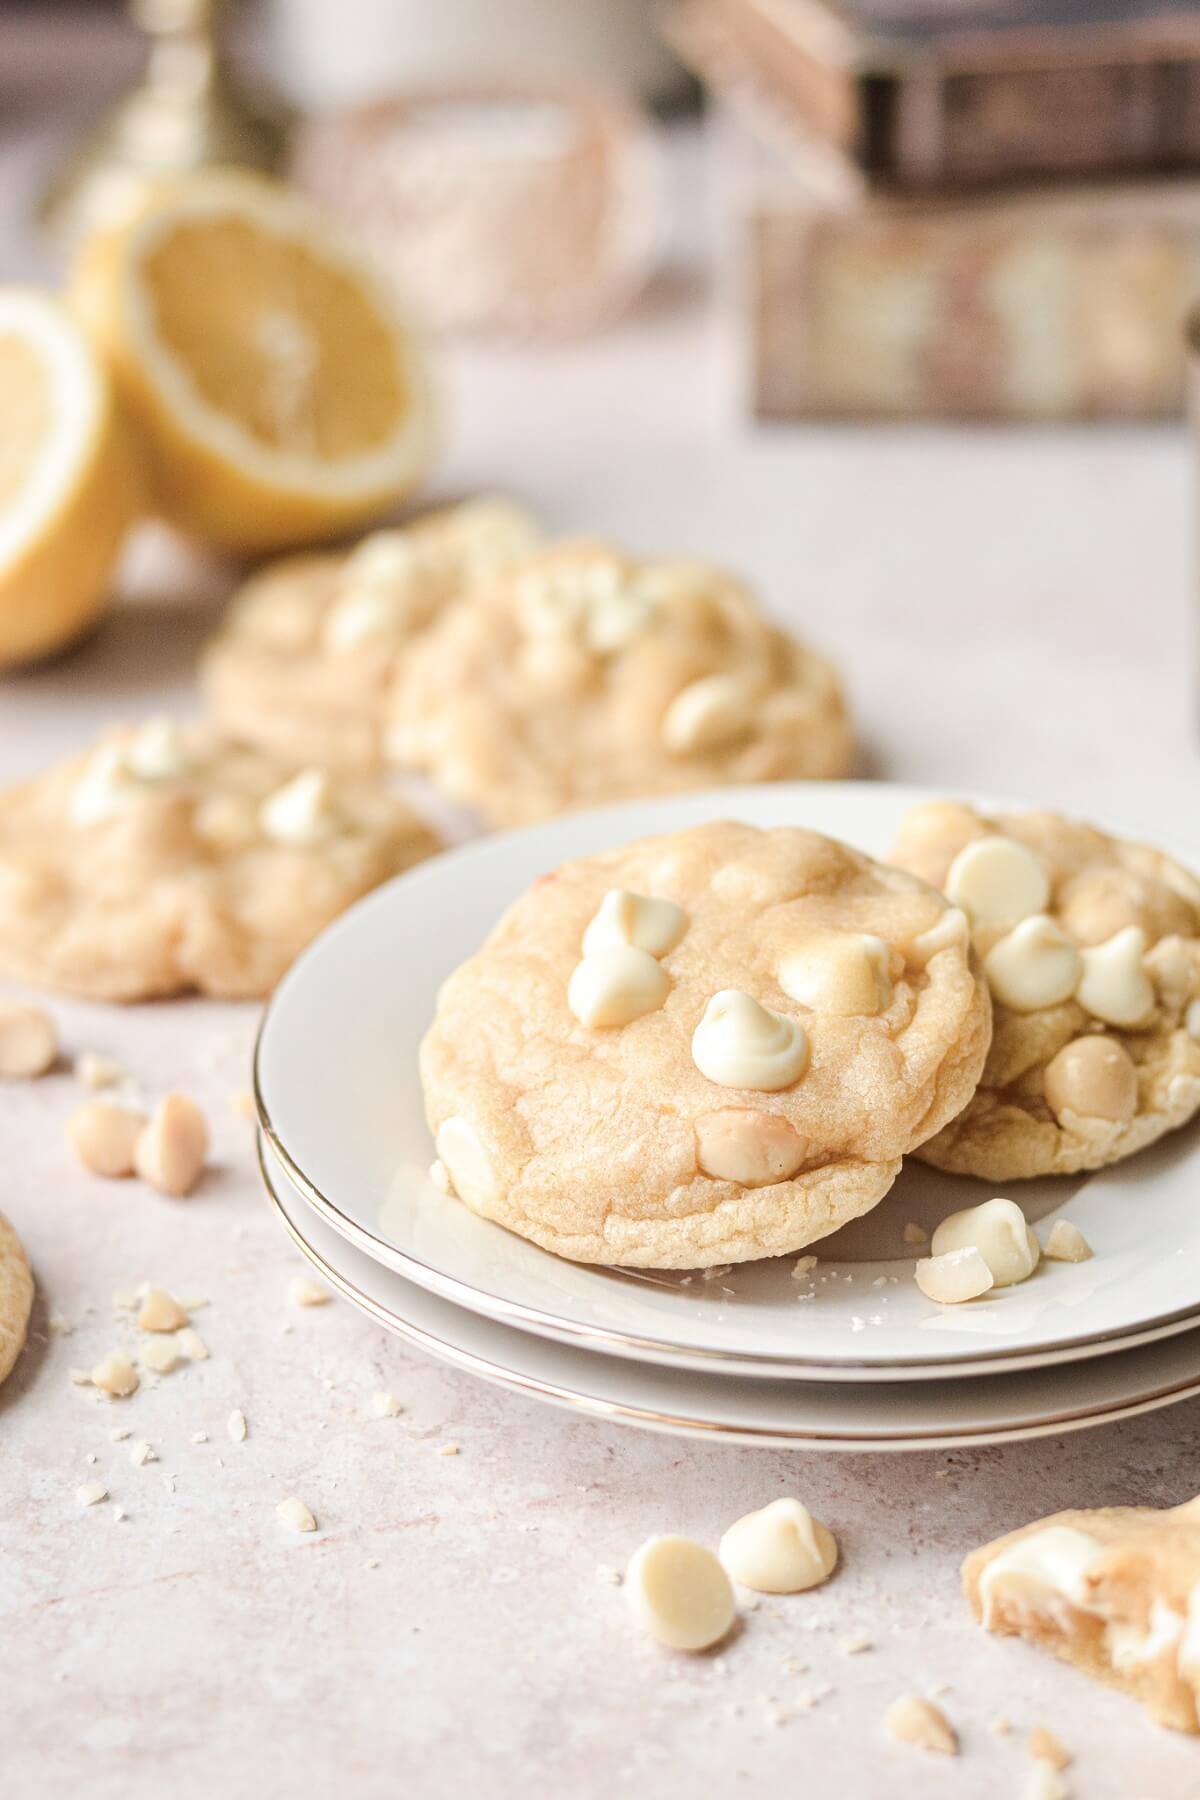 Plate of soft lemon cookies with white chocolate chips and macadamia nuts.